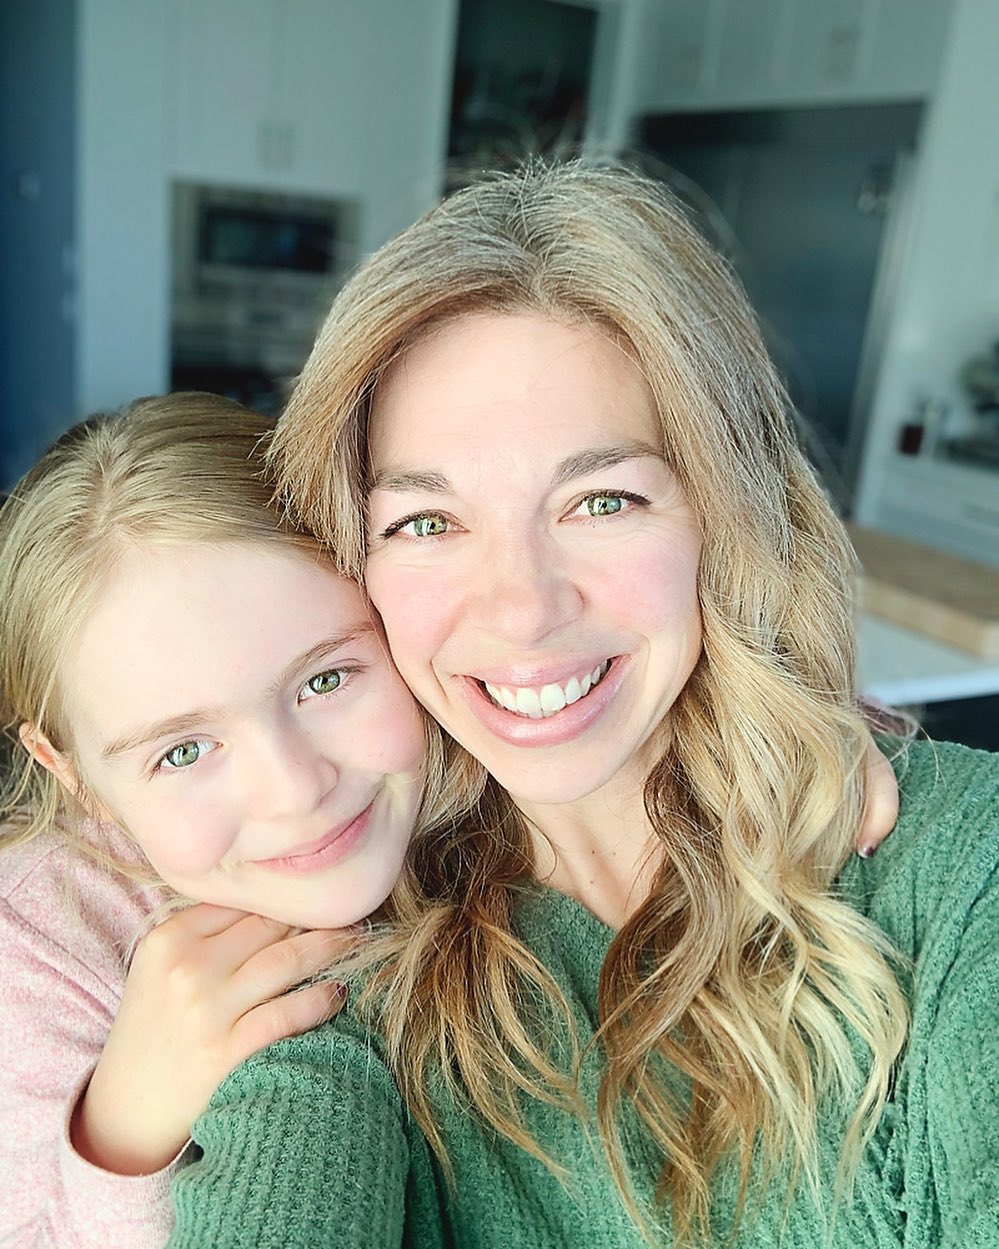 March 8th is international Women's Day. Today I am thinking of all of the incredible women I have known in my life who have inspired me and lifted me up in times of need. Also, to all of the young women, like my incredible daughter Ella, who inspire me daily. I am so grateful for all of the incredible women in my life. Sending love and gratitude to you all today and everyday ❤️.

To all of the women young and old in the Ukraine, we send you loving kindness 🙏🏻

#womensday #womensday2022❤️ #internationalwomensday2022